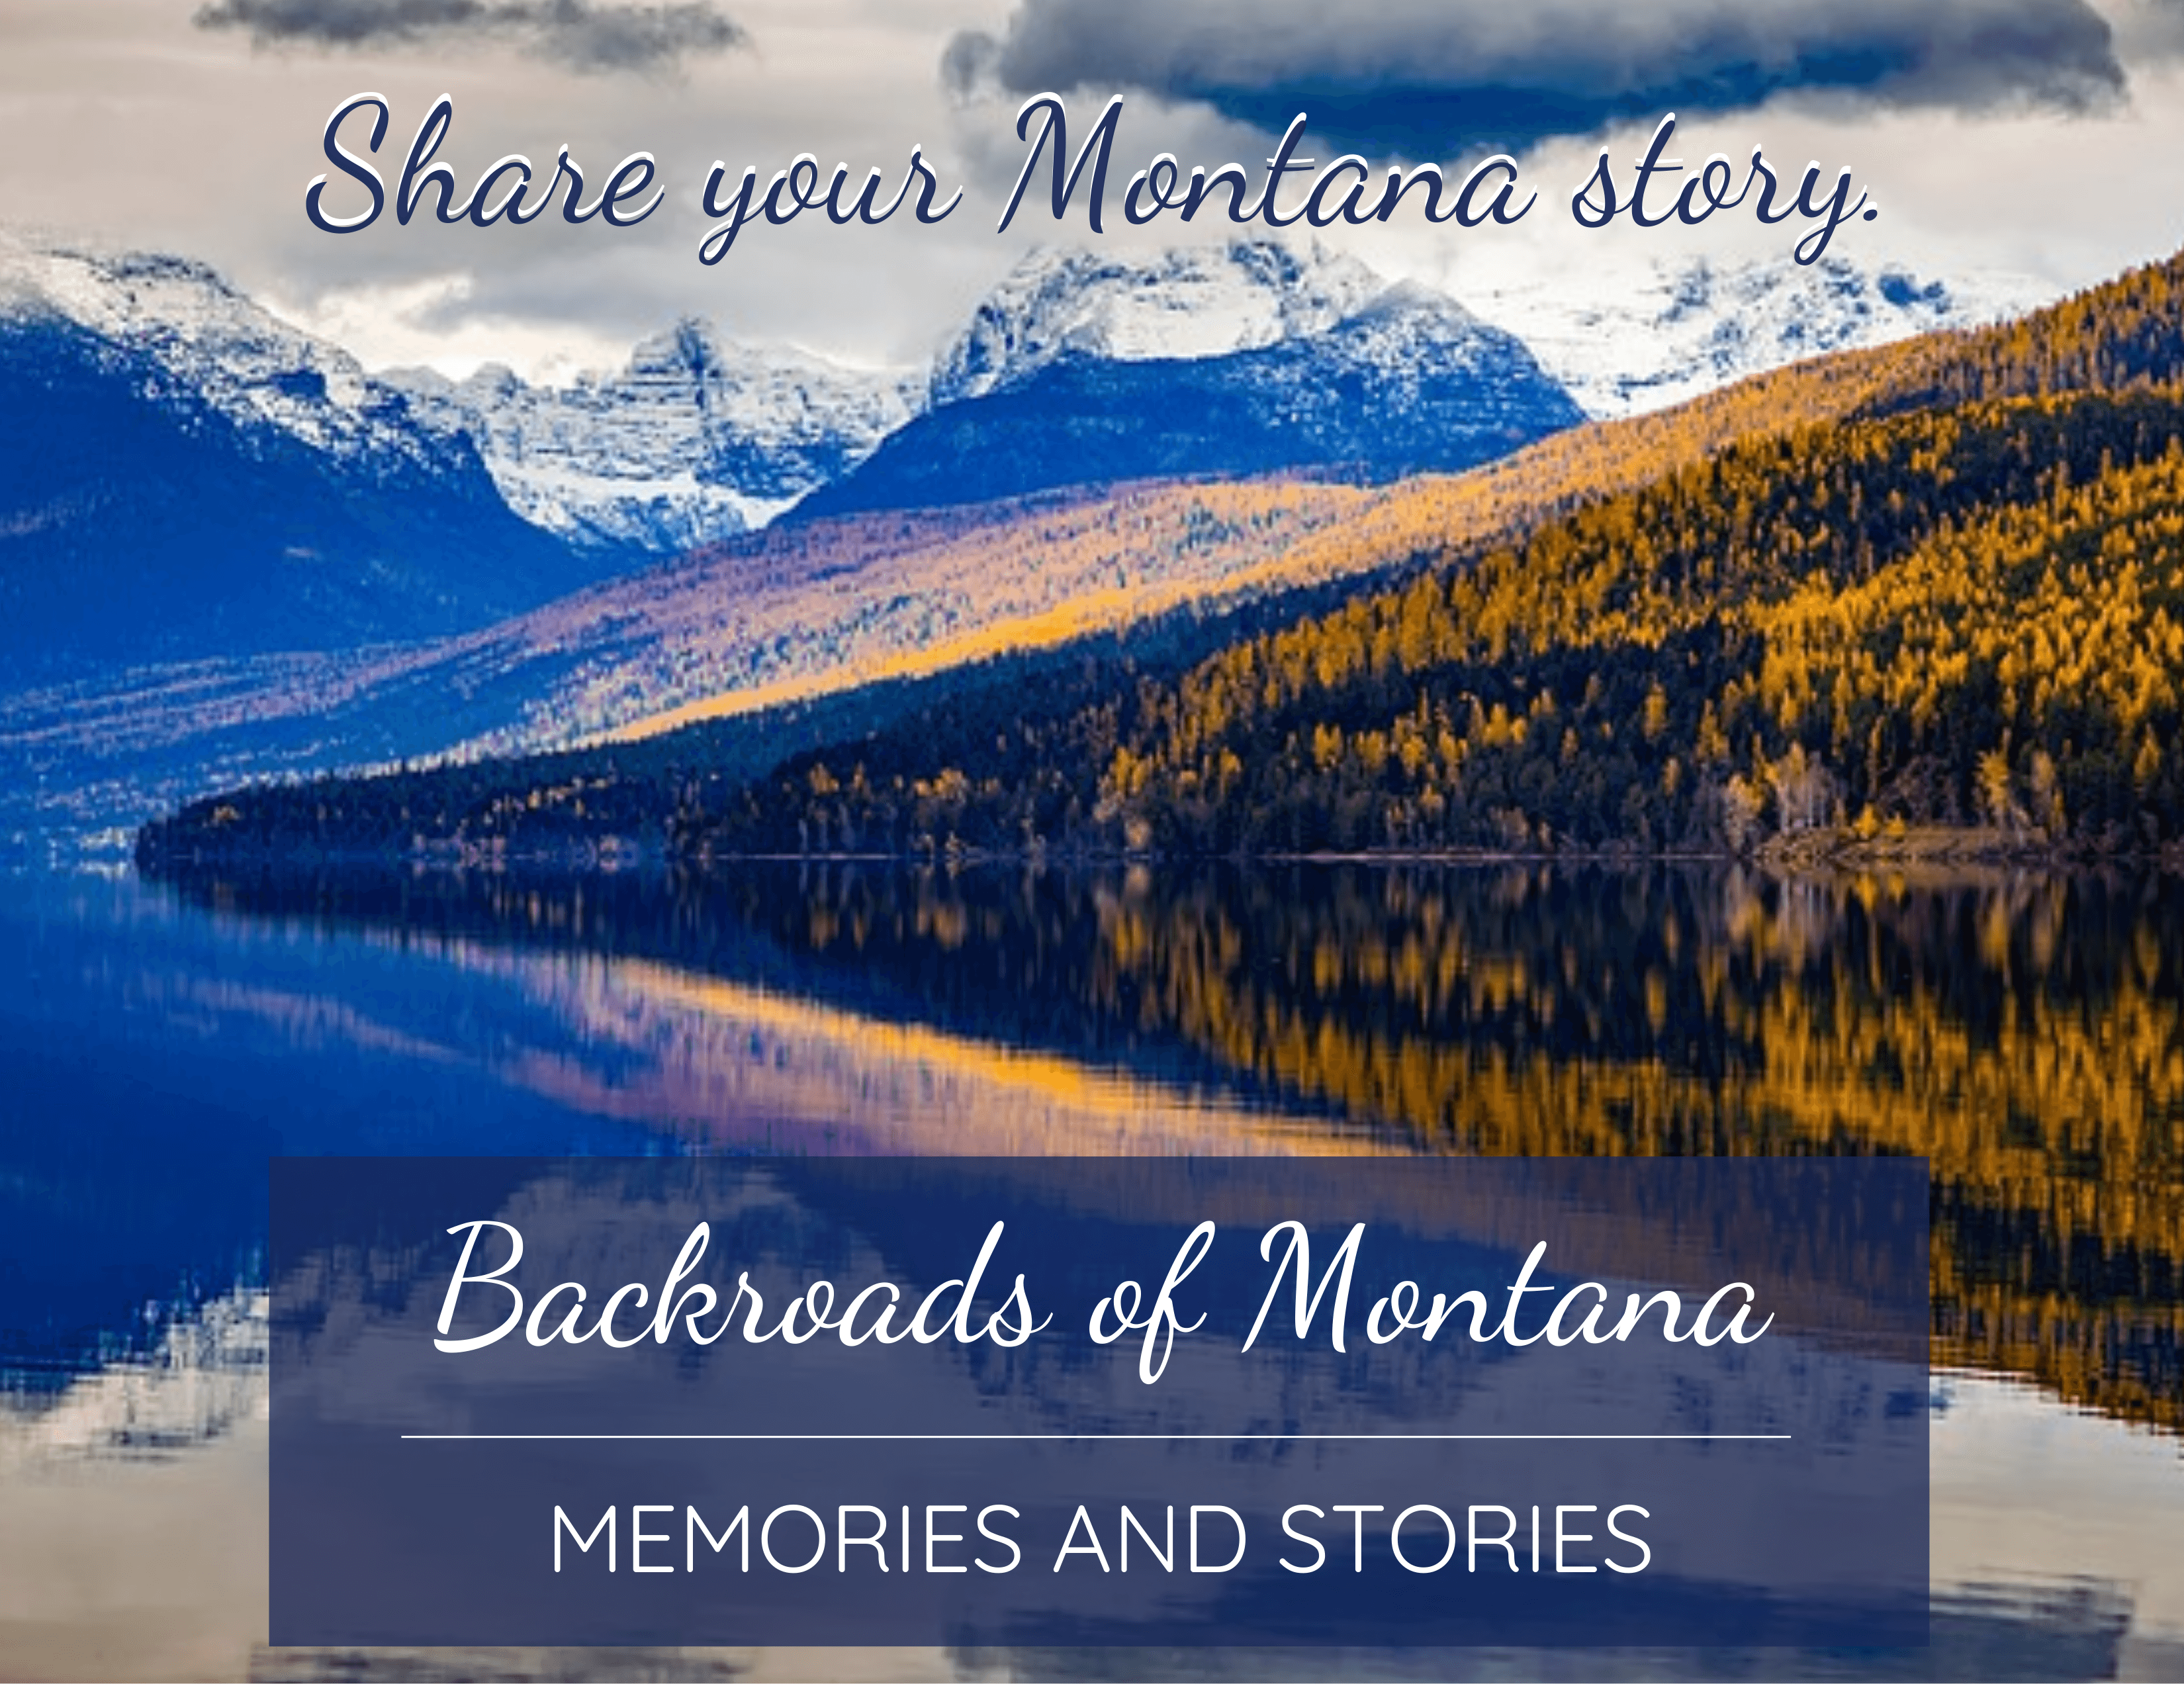 Join us for a new event at the Helena Senior Center that celebrates our Montana roots!